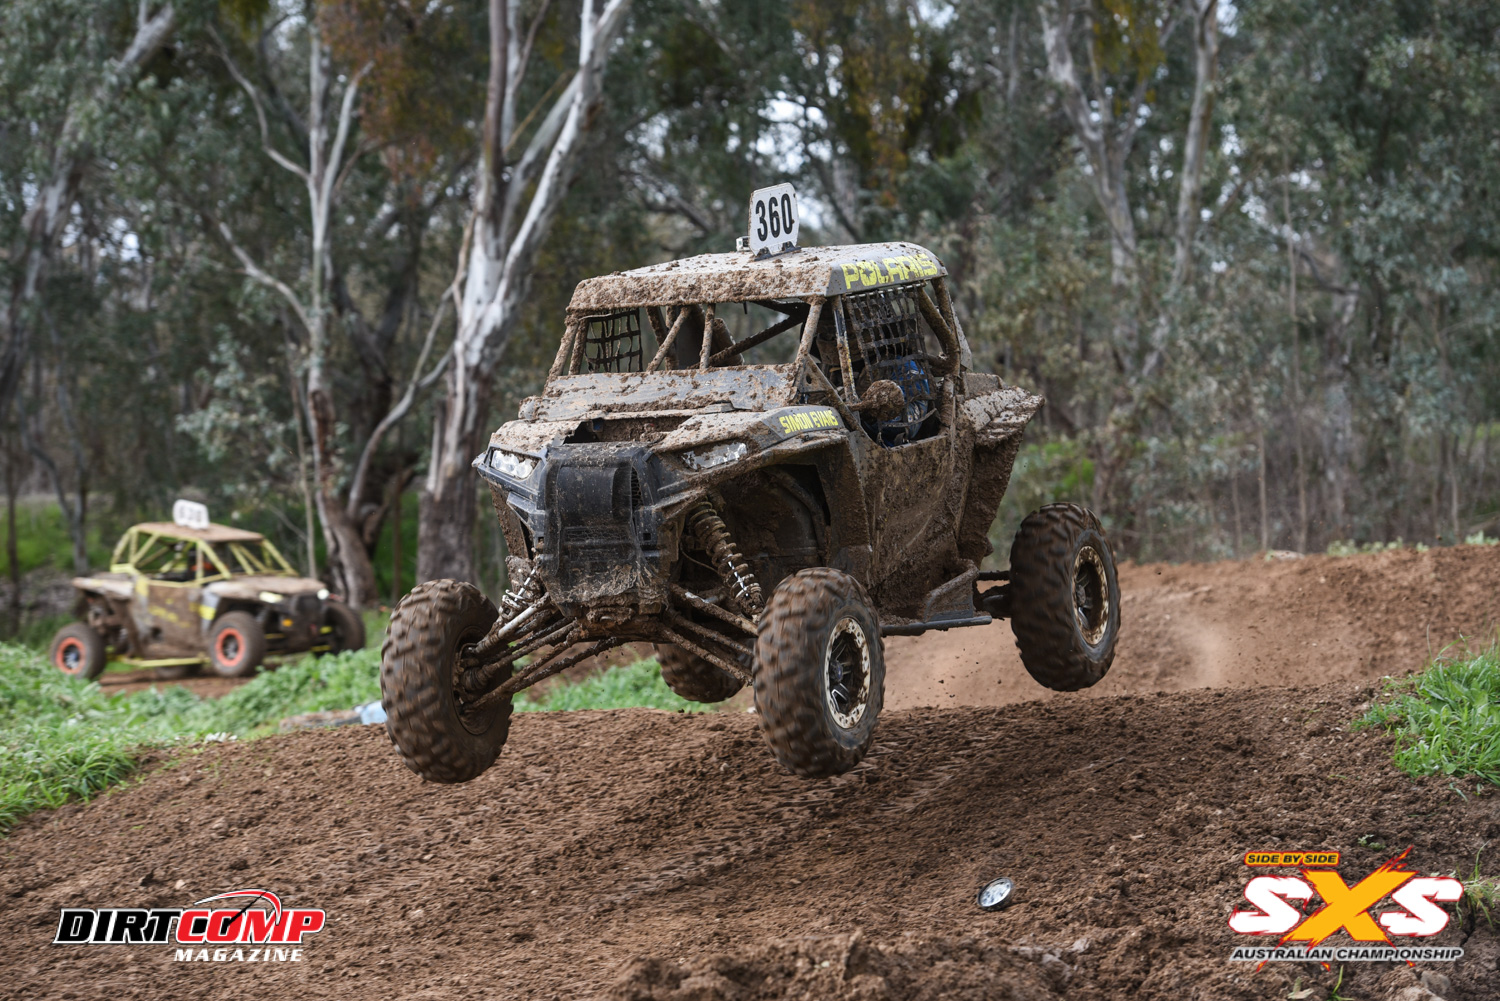 Simon Evans has reignited his rivalry with former ARC Champ Cody Crocker on the SXS platform